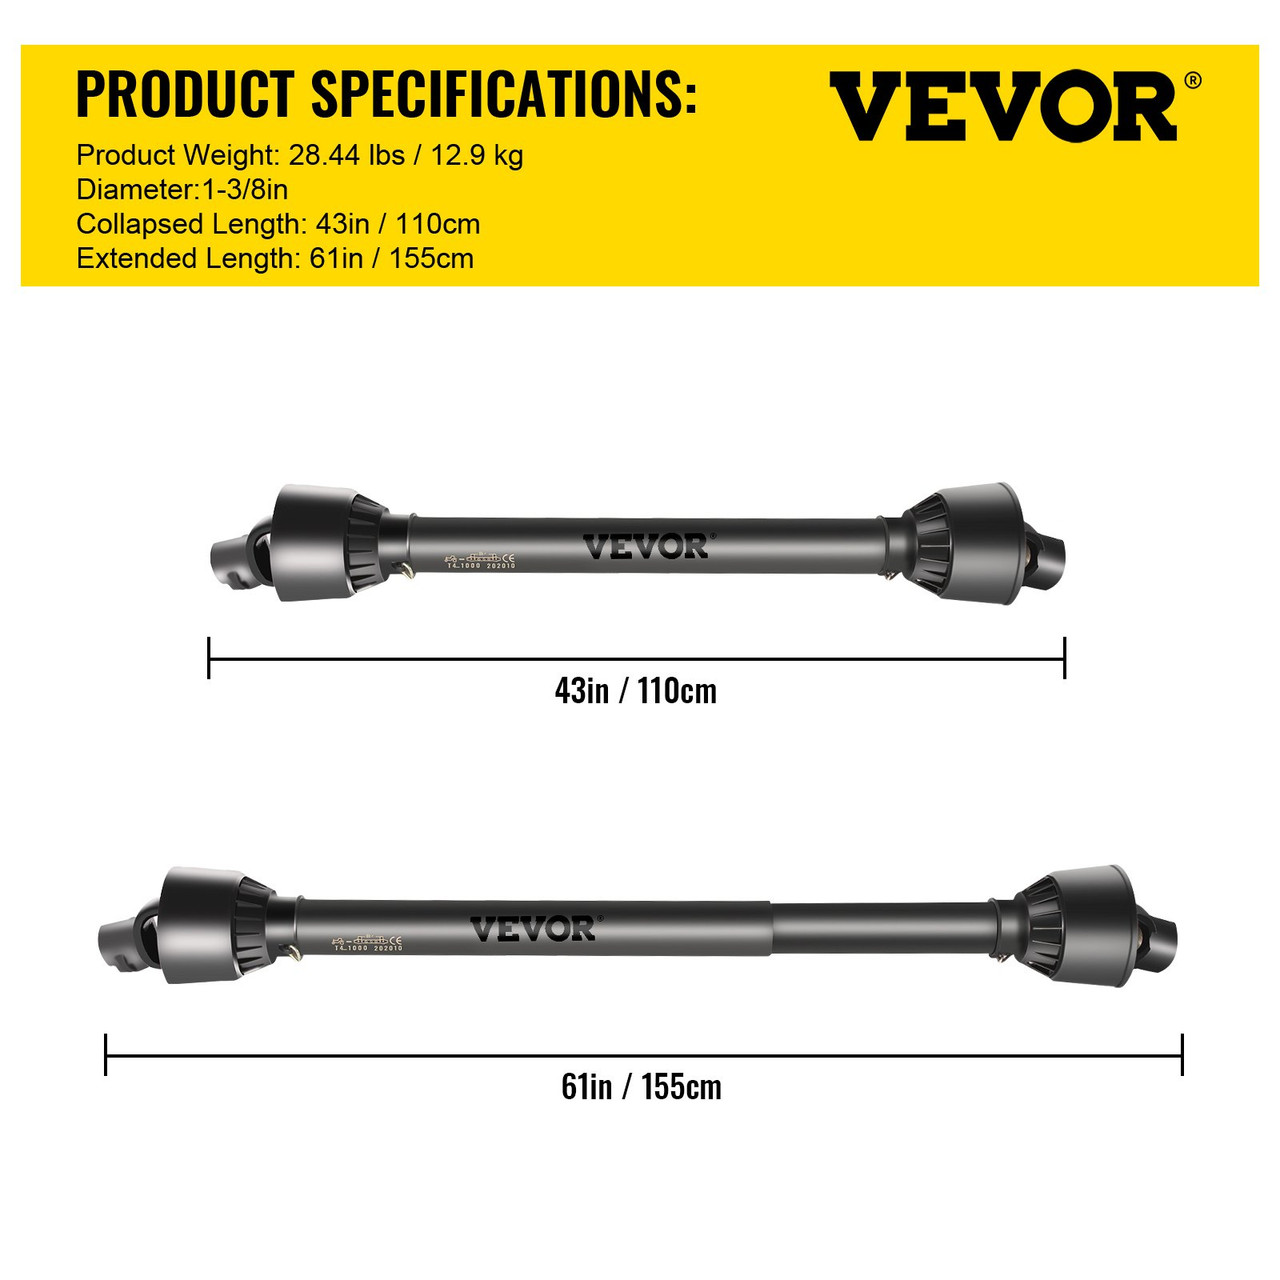 PTO Shaft, 1-3/8" PTO Drive Shaft, 6 Spline Tractor, Round Implement Ends PTO Driveline Shaft, Series 4 Tractor PTO Shaft, 43"-61" Brush Hog PTO Shaft Black, for Finish Mower, Rotary Cutter